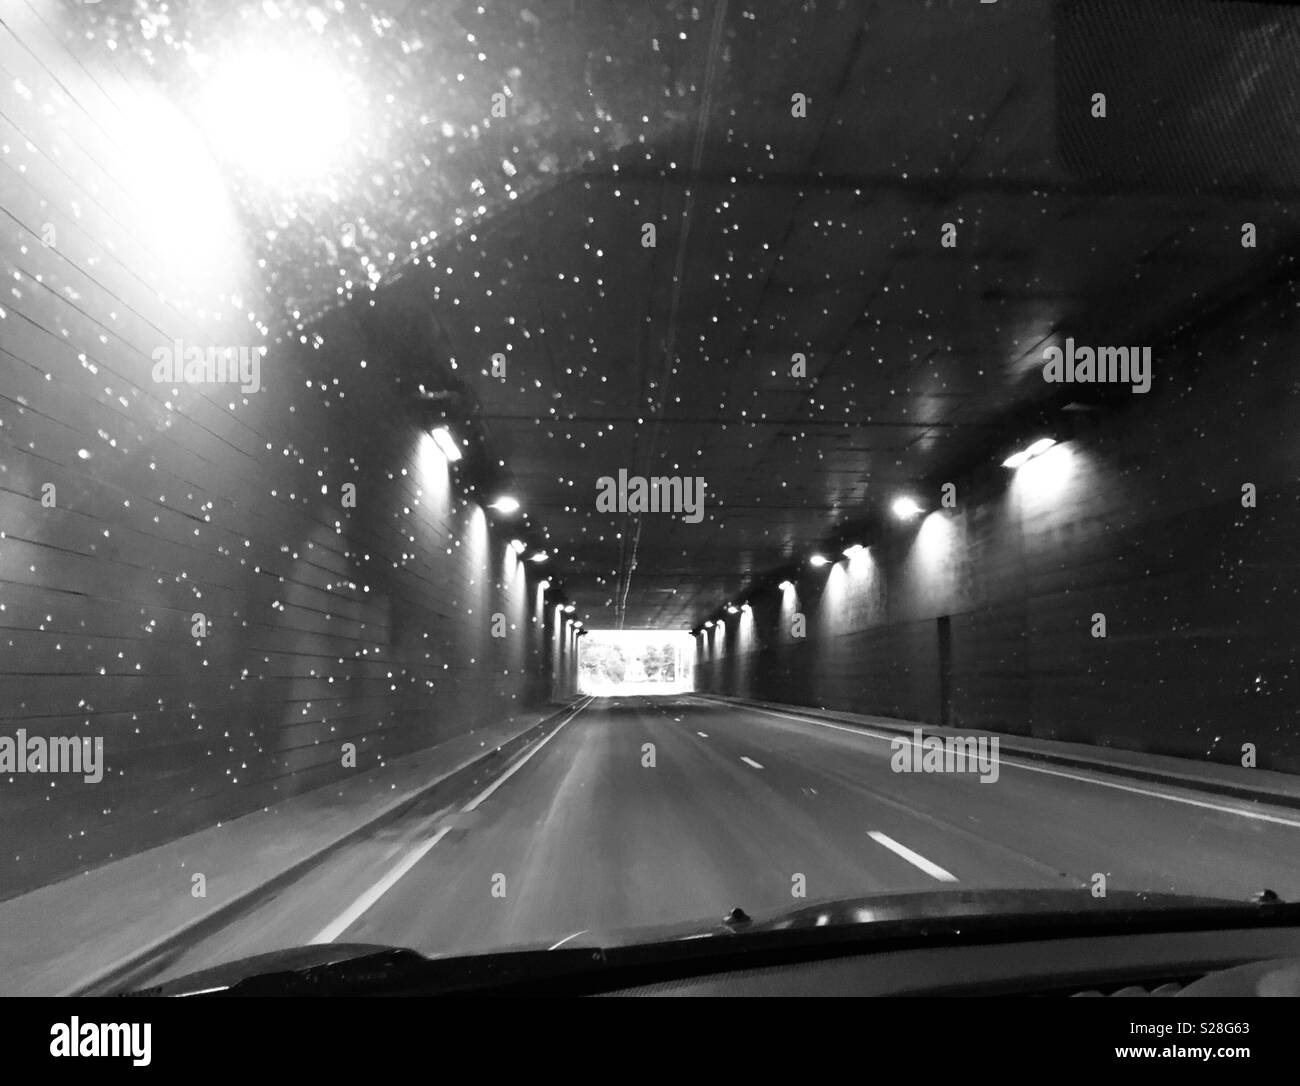 Driving through a tunnel with rain drops on the windscreen Stock Photo